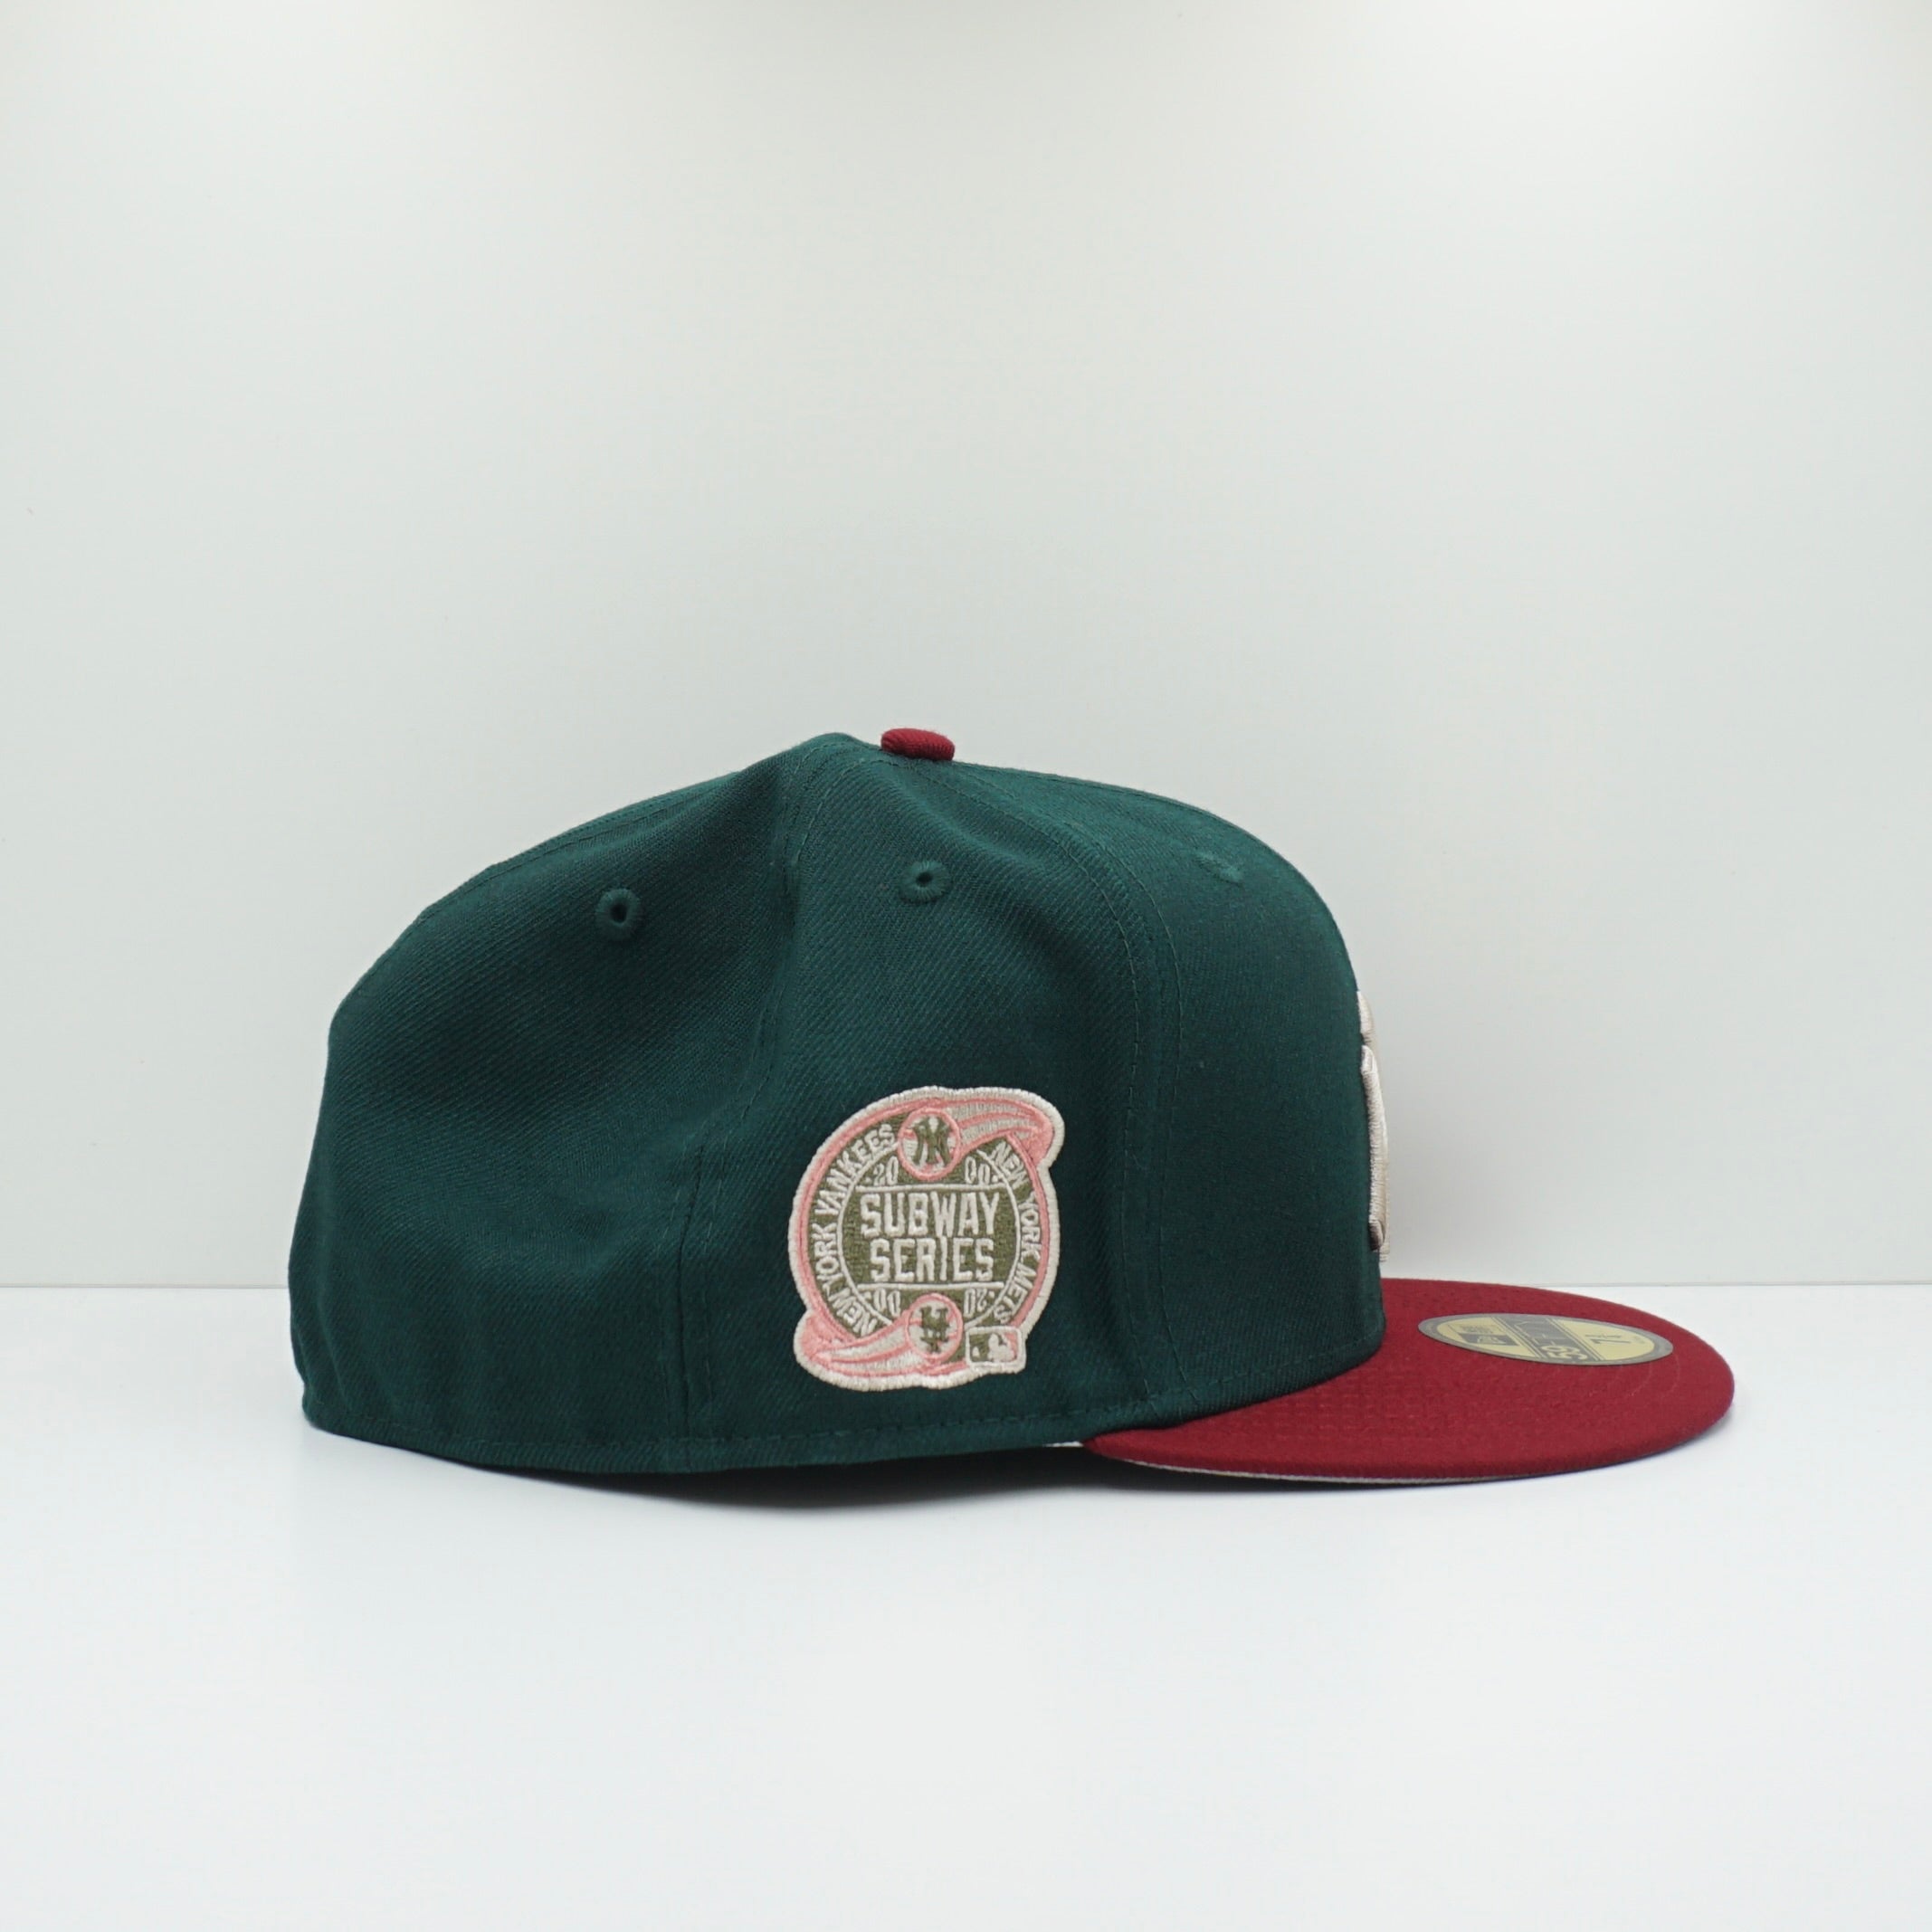 New Era Cooperstown New York Yankees Green/Red Fitted Cap